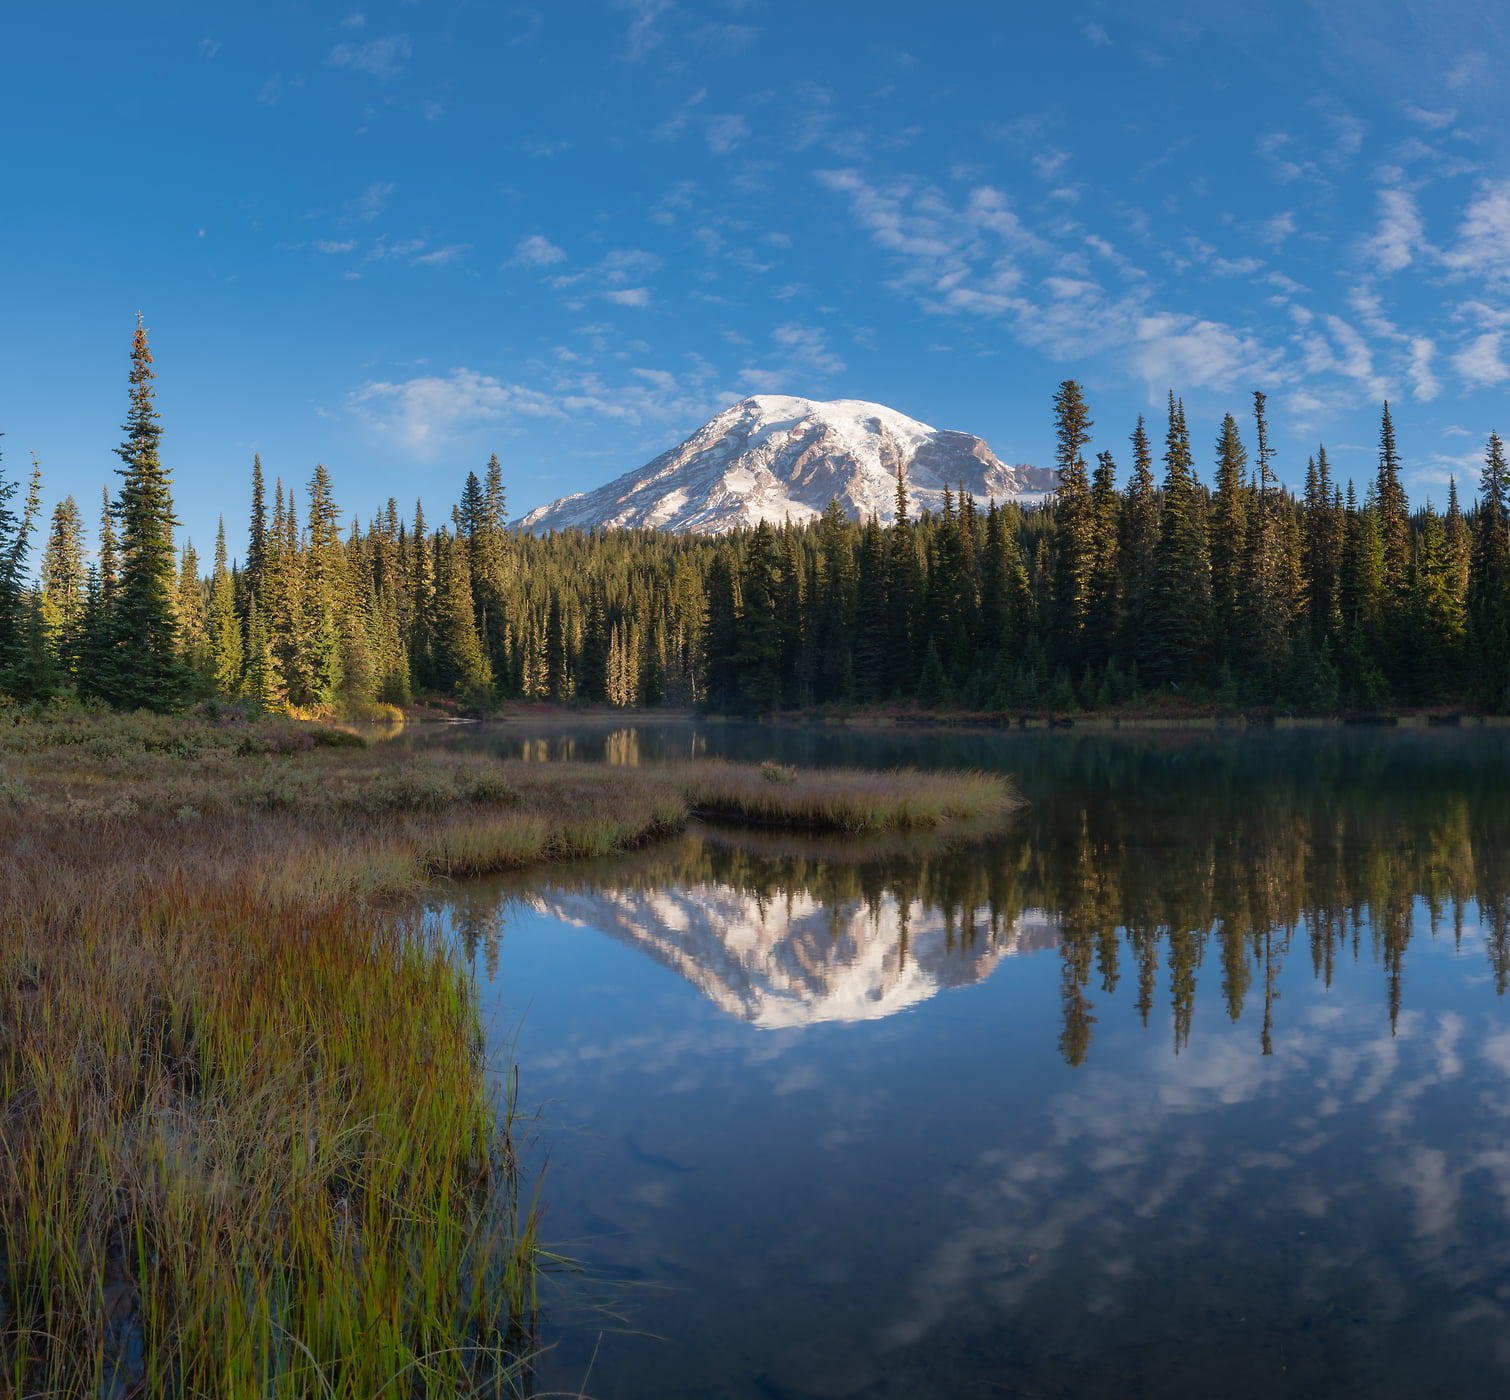 229 megapixels! A very high resolution, large-format VAST photo print of Reflection Lake in Mount Rainier National Park; photograph created by Greg Probst in Reflection Lake, Mount Rainier National Park, Washington.